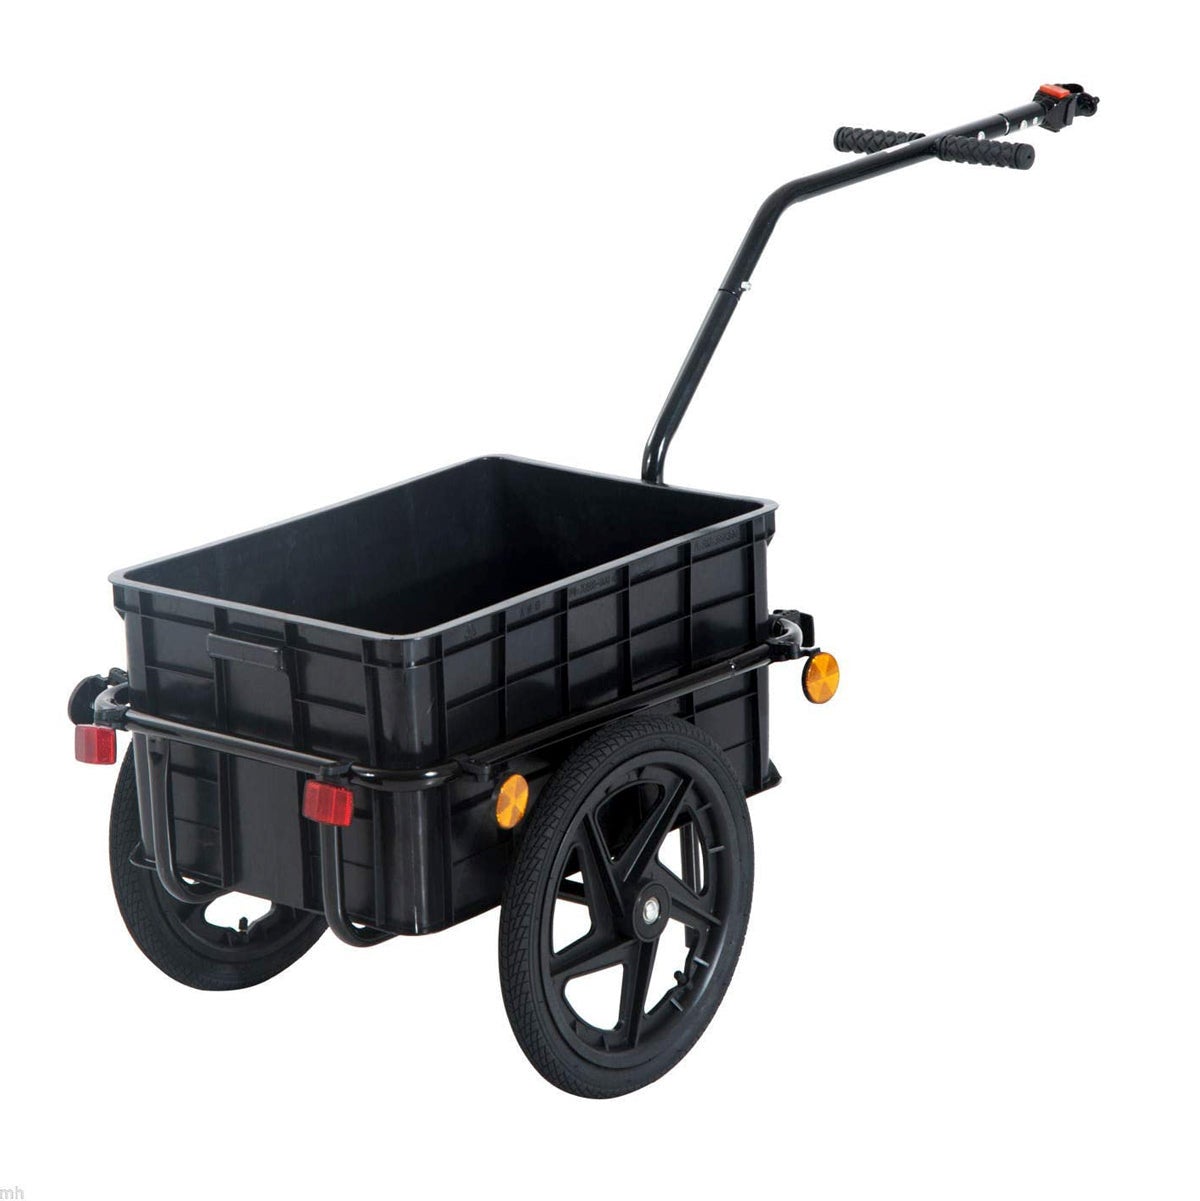 Bicycle Cargo Trailer with Removable Box and Waterproof Cover, Bike Wagon Trailer with Two 16inch Wheels